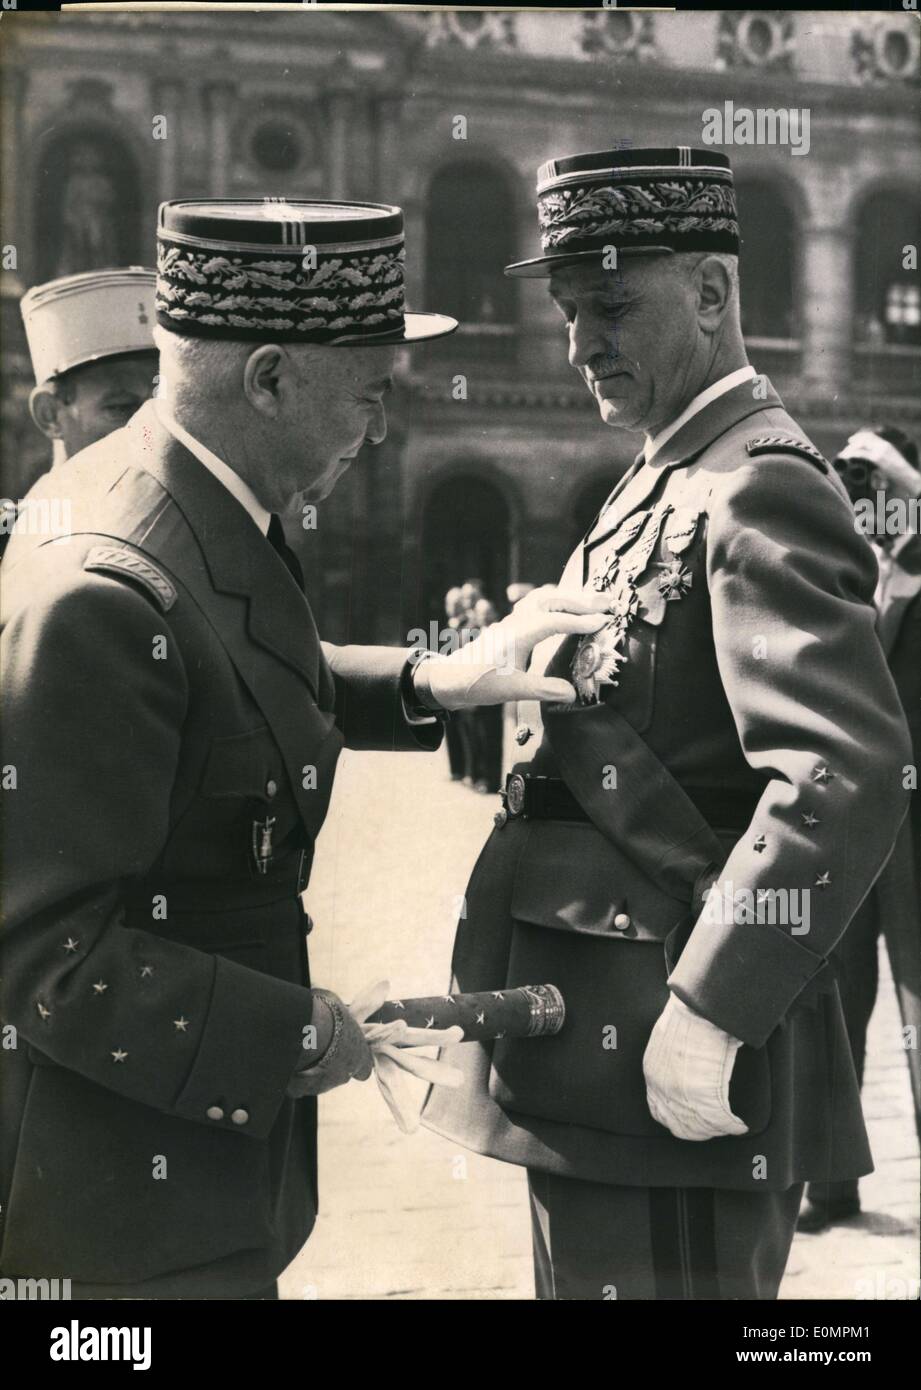 Apr. 21, 1956 - General awarded Grand cross of Legion of Honour: General Carpentier, former Commander of NATO Ground forces centre Europe was awarded the Grand Cross of the Legion of Honour during a ceremony held in the court yard of the invalides, Paris, today. Marshal Juin confers the distinction on General Carpentier. Stock Photo